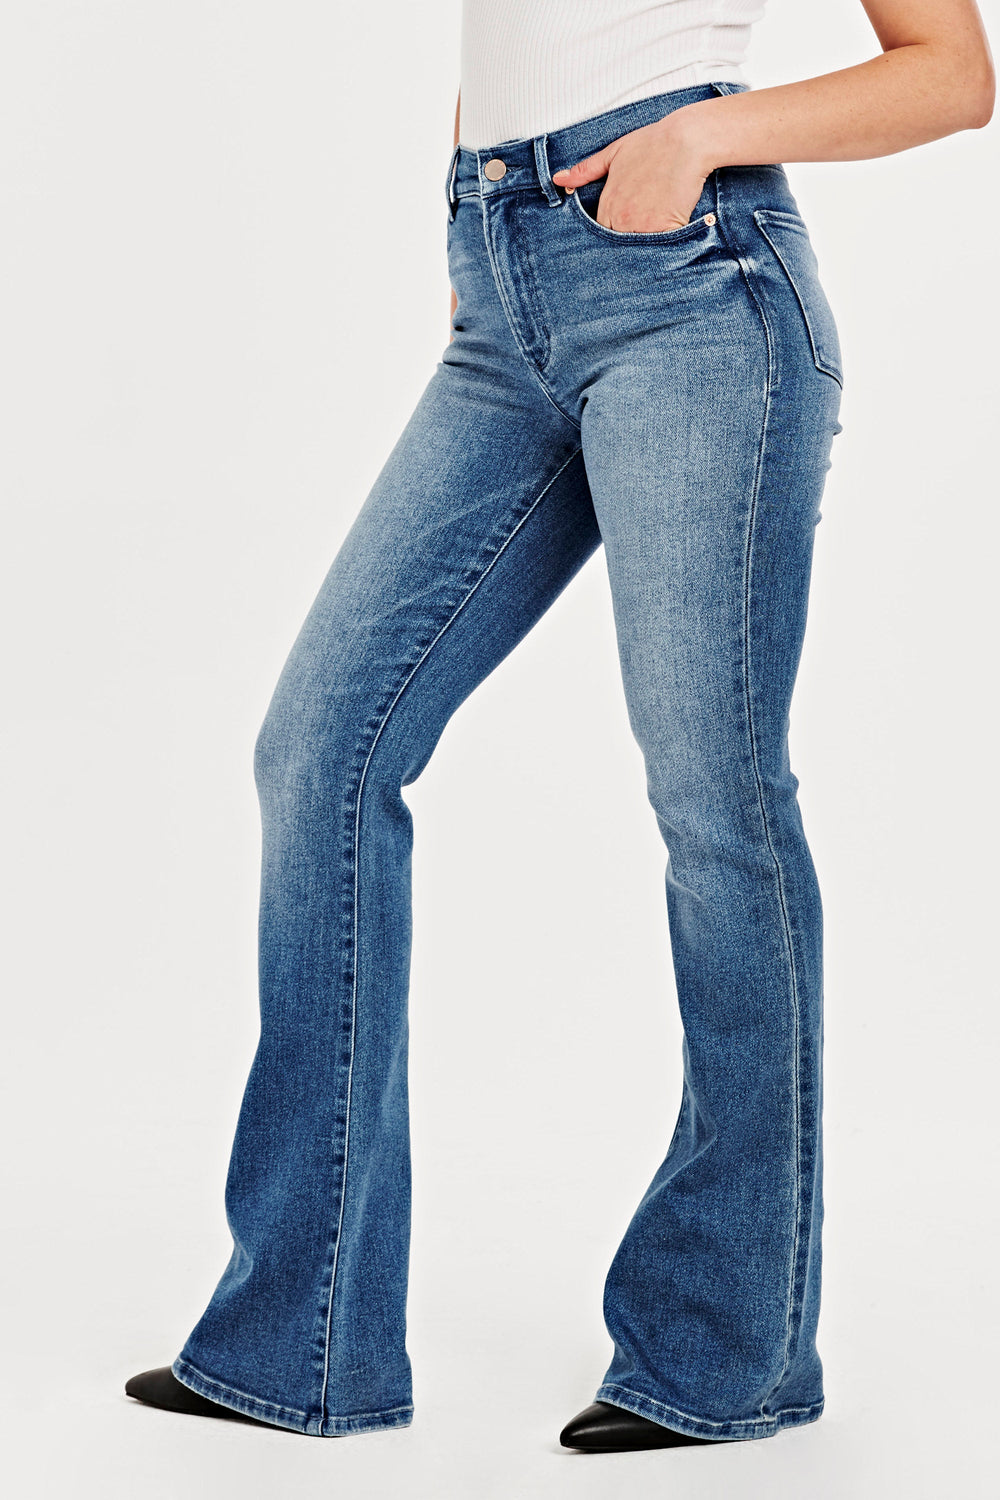 image of a female model wearing a LANEY HIGH RISE FLARE JEANS ITASCA JEANS